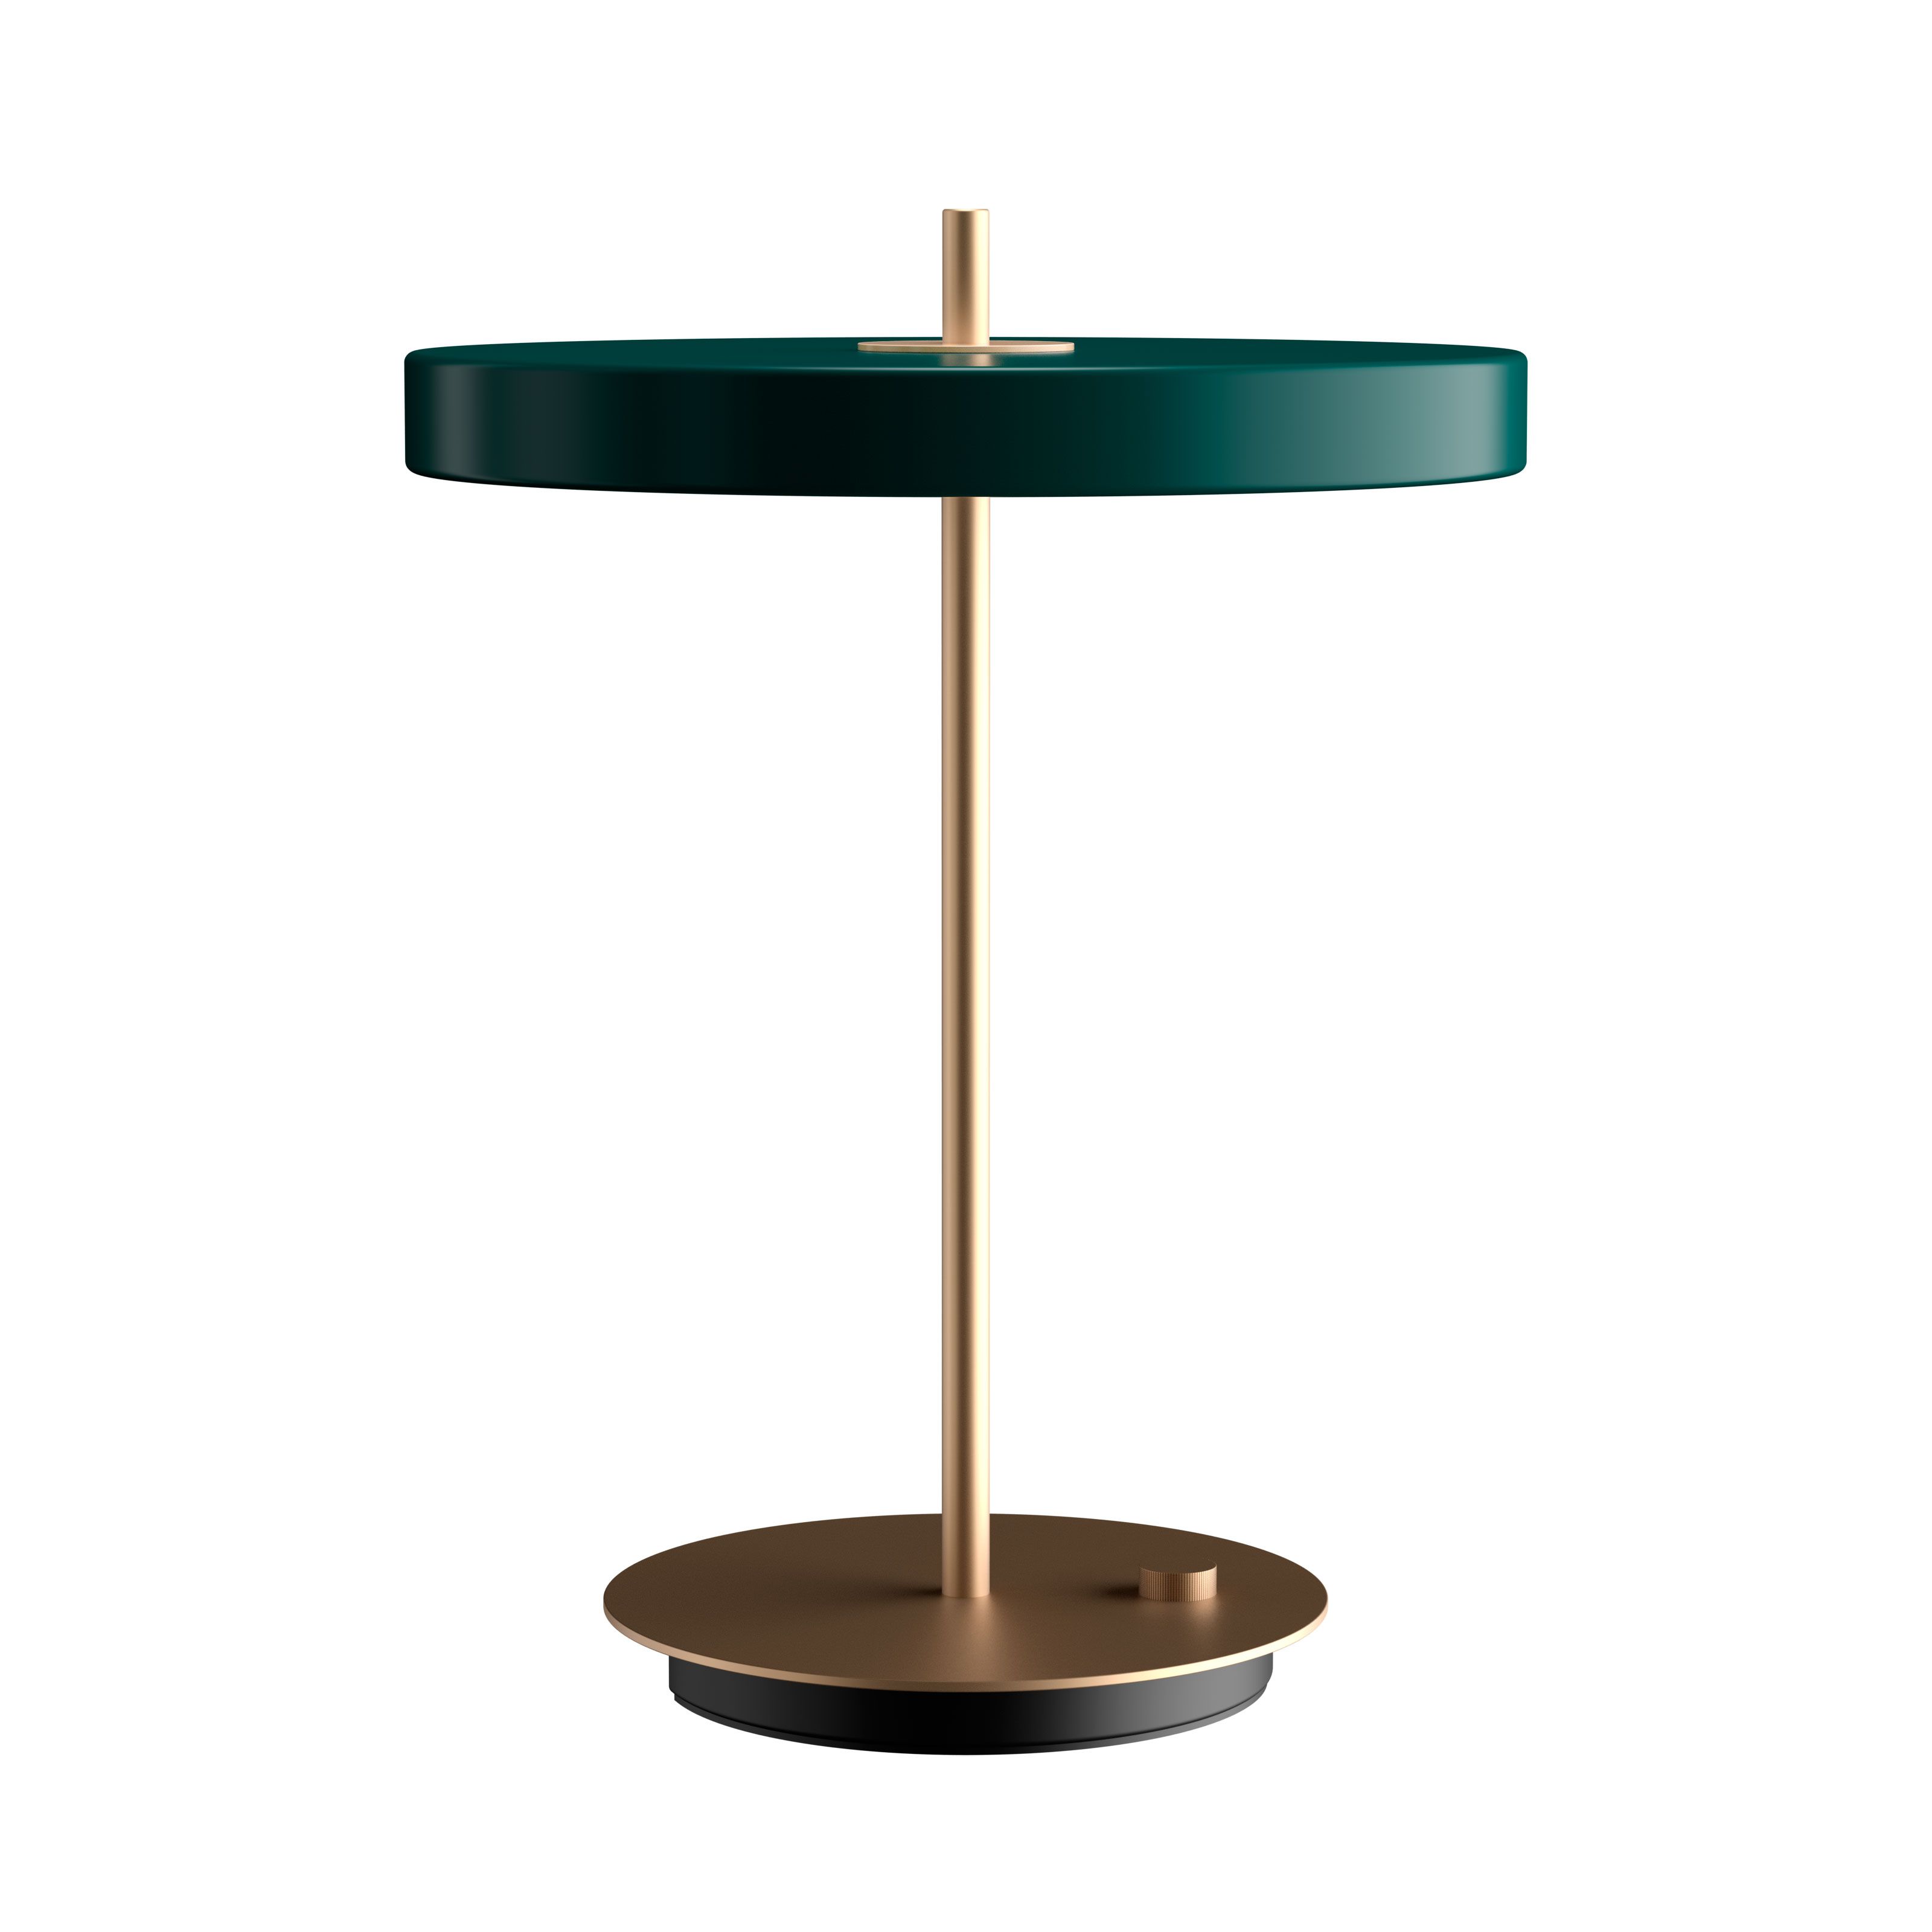 Asteria forest green table lamp